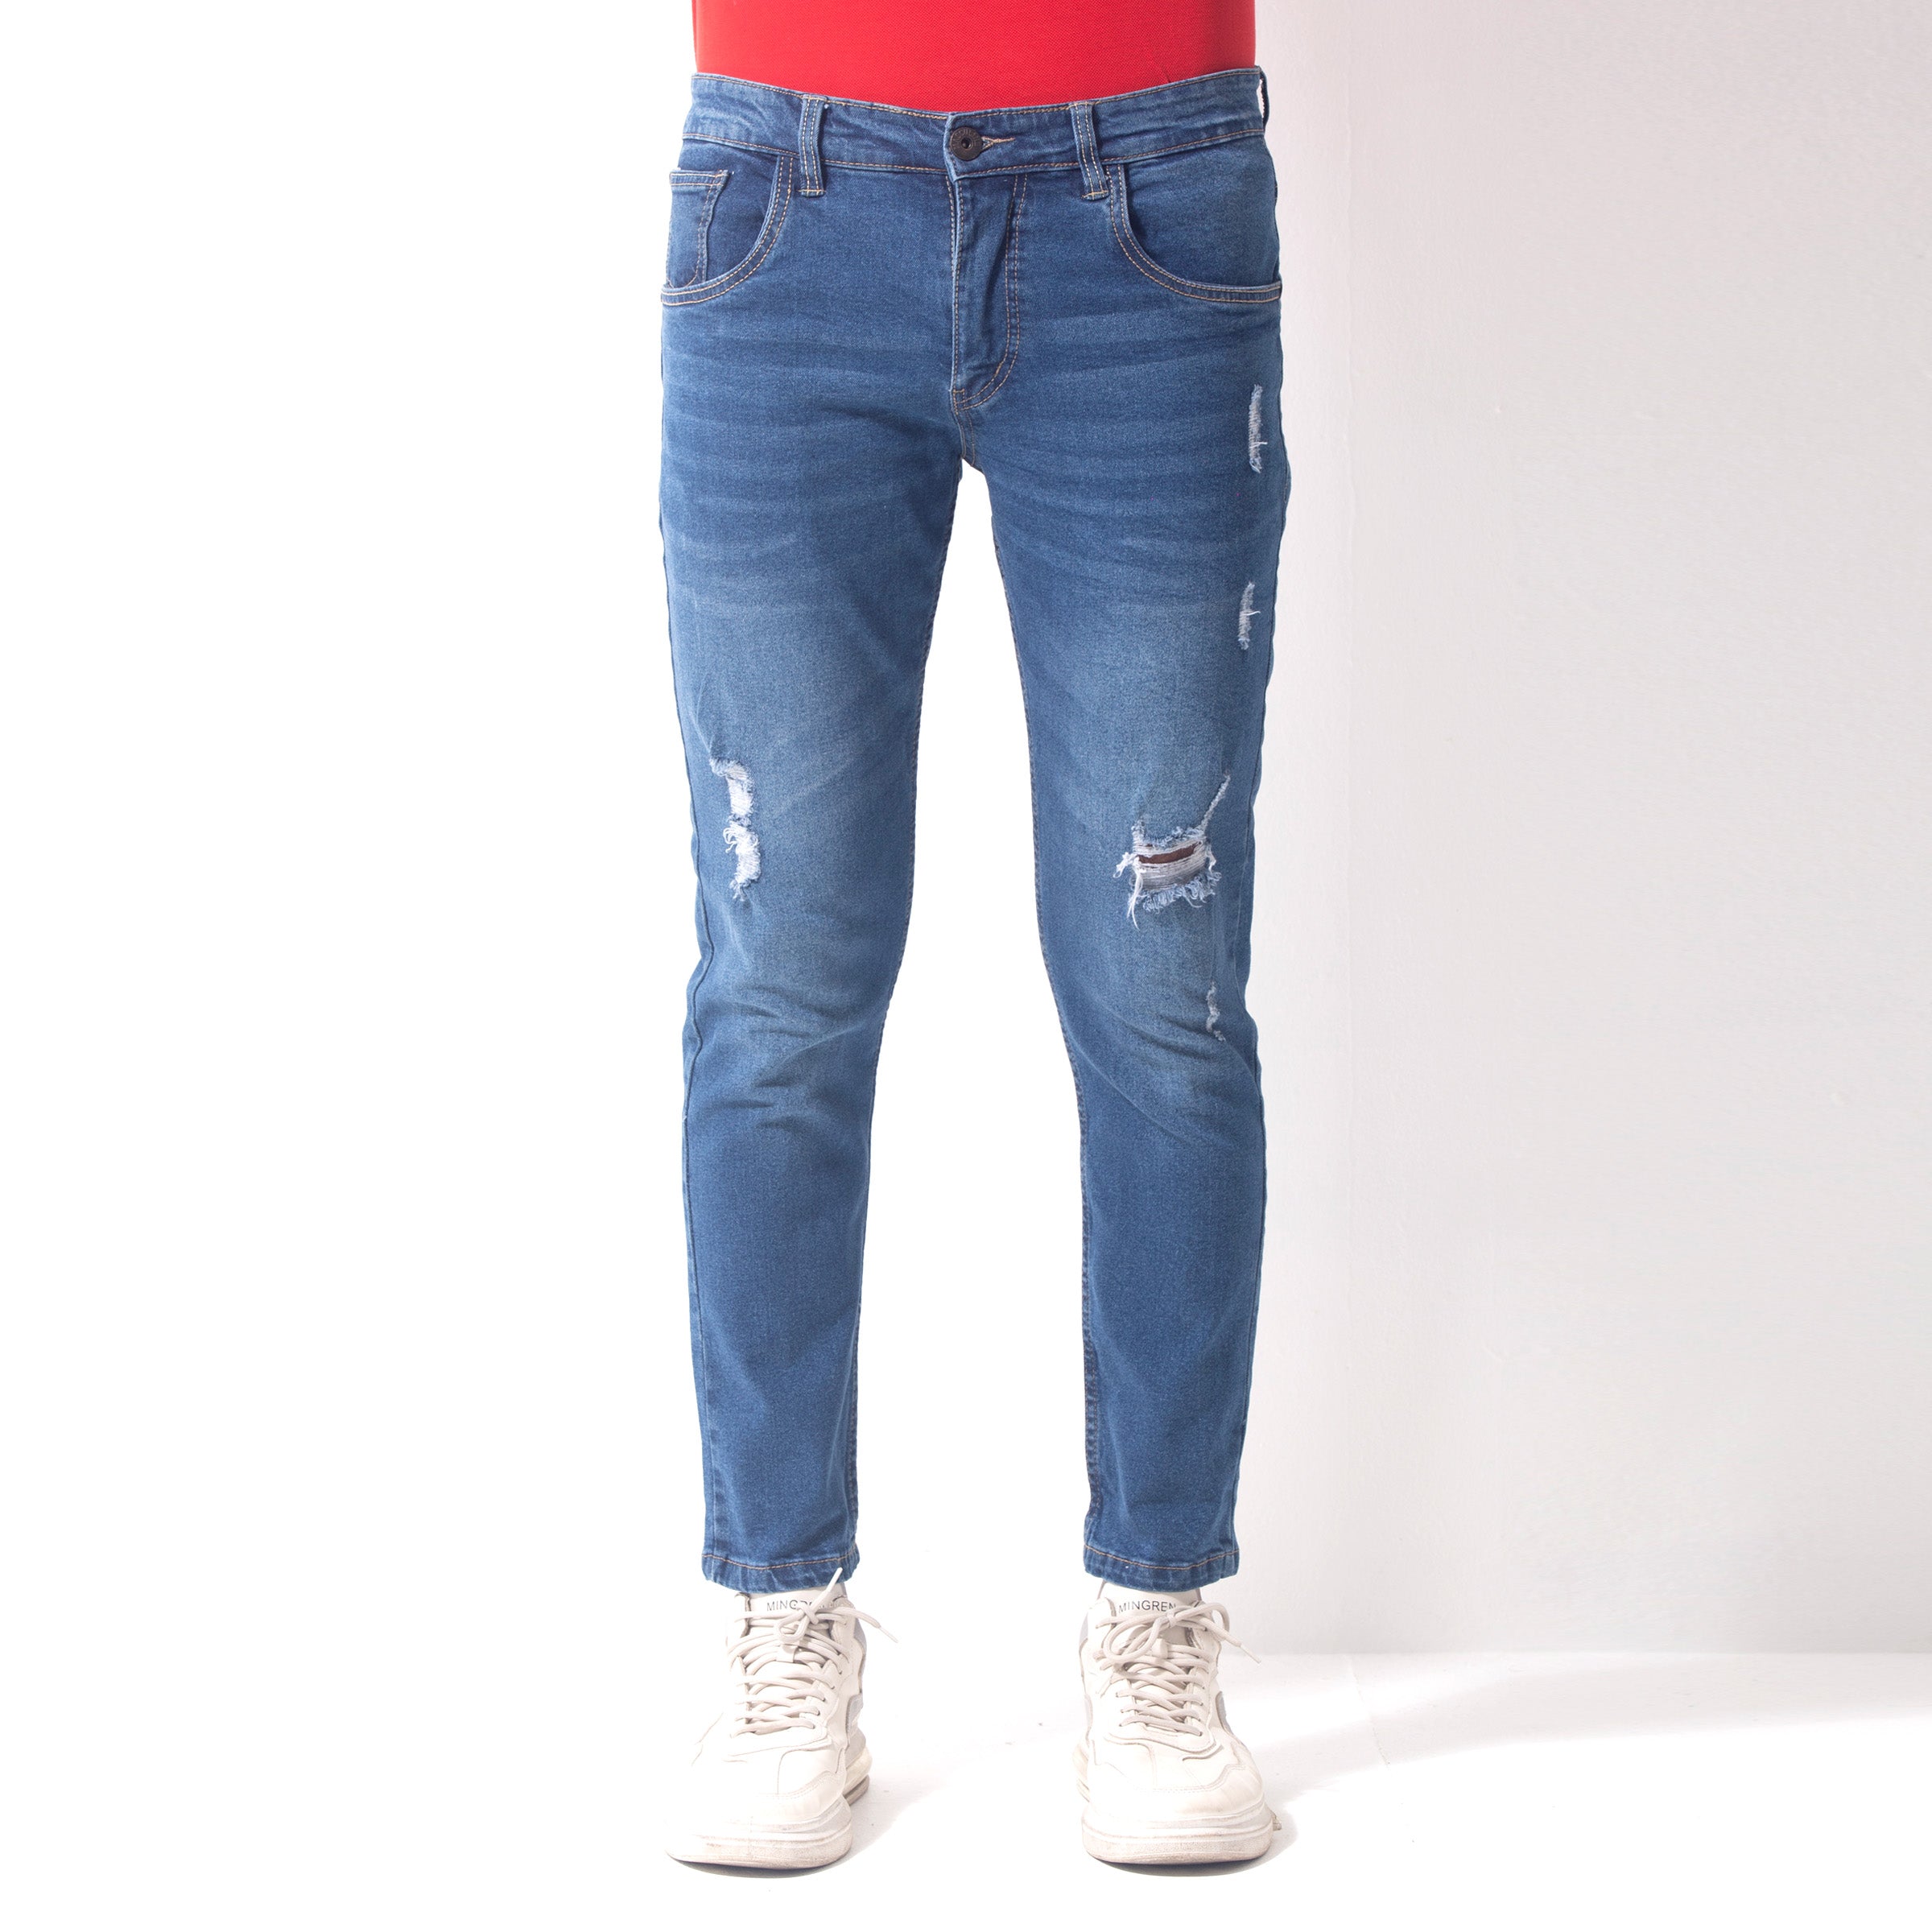 Stretchable Ripped Jeans Pant - Mid blue